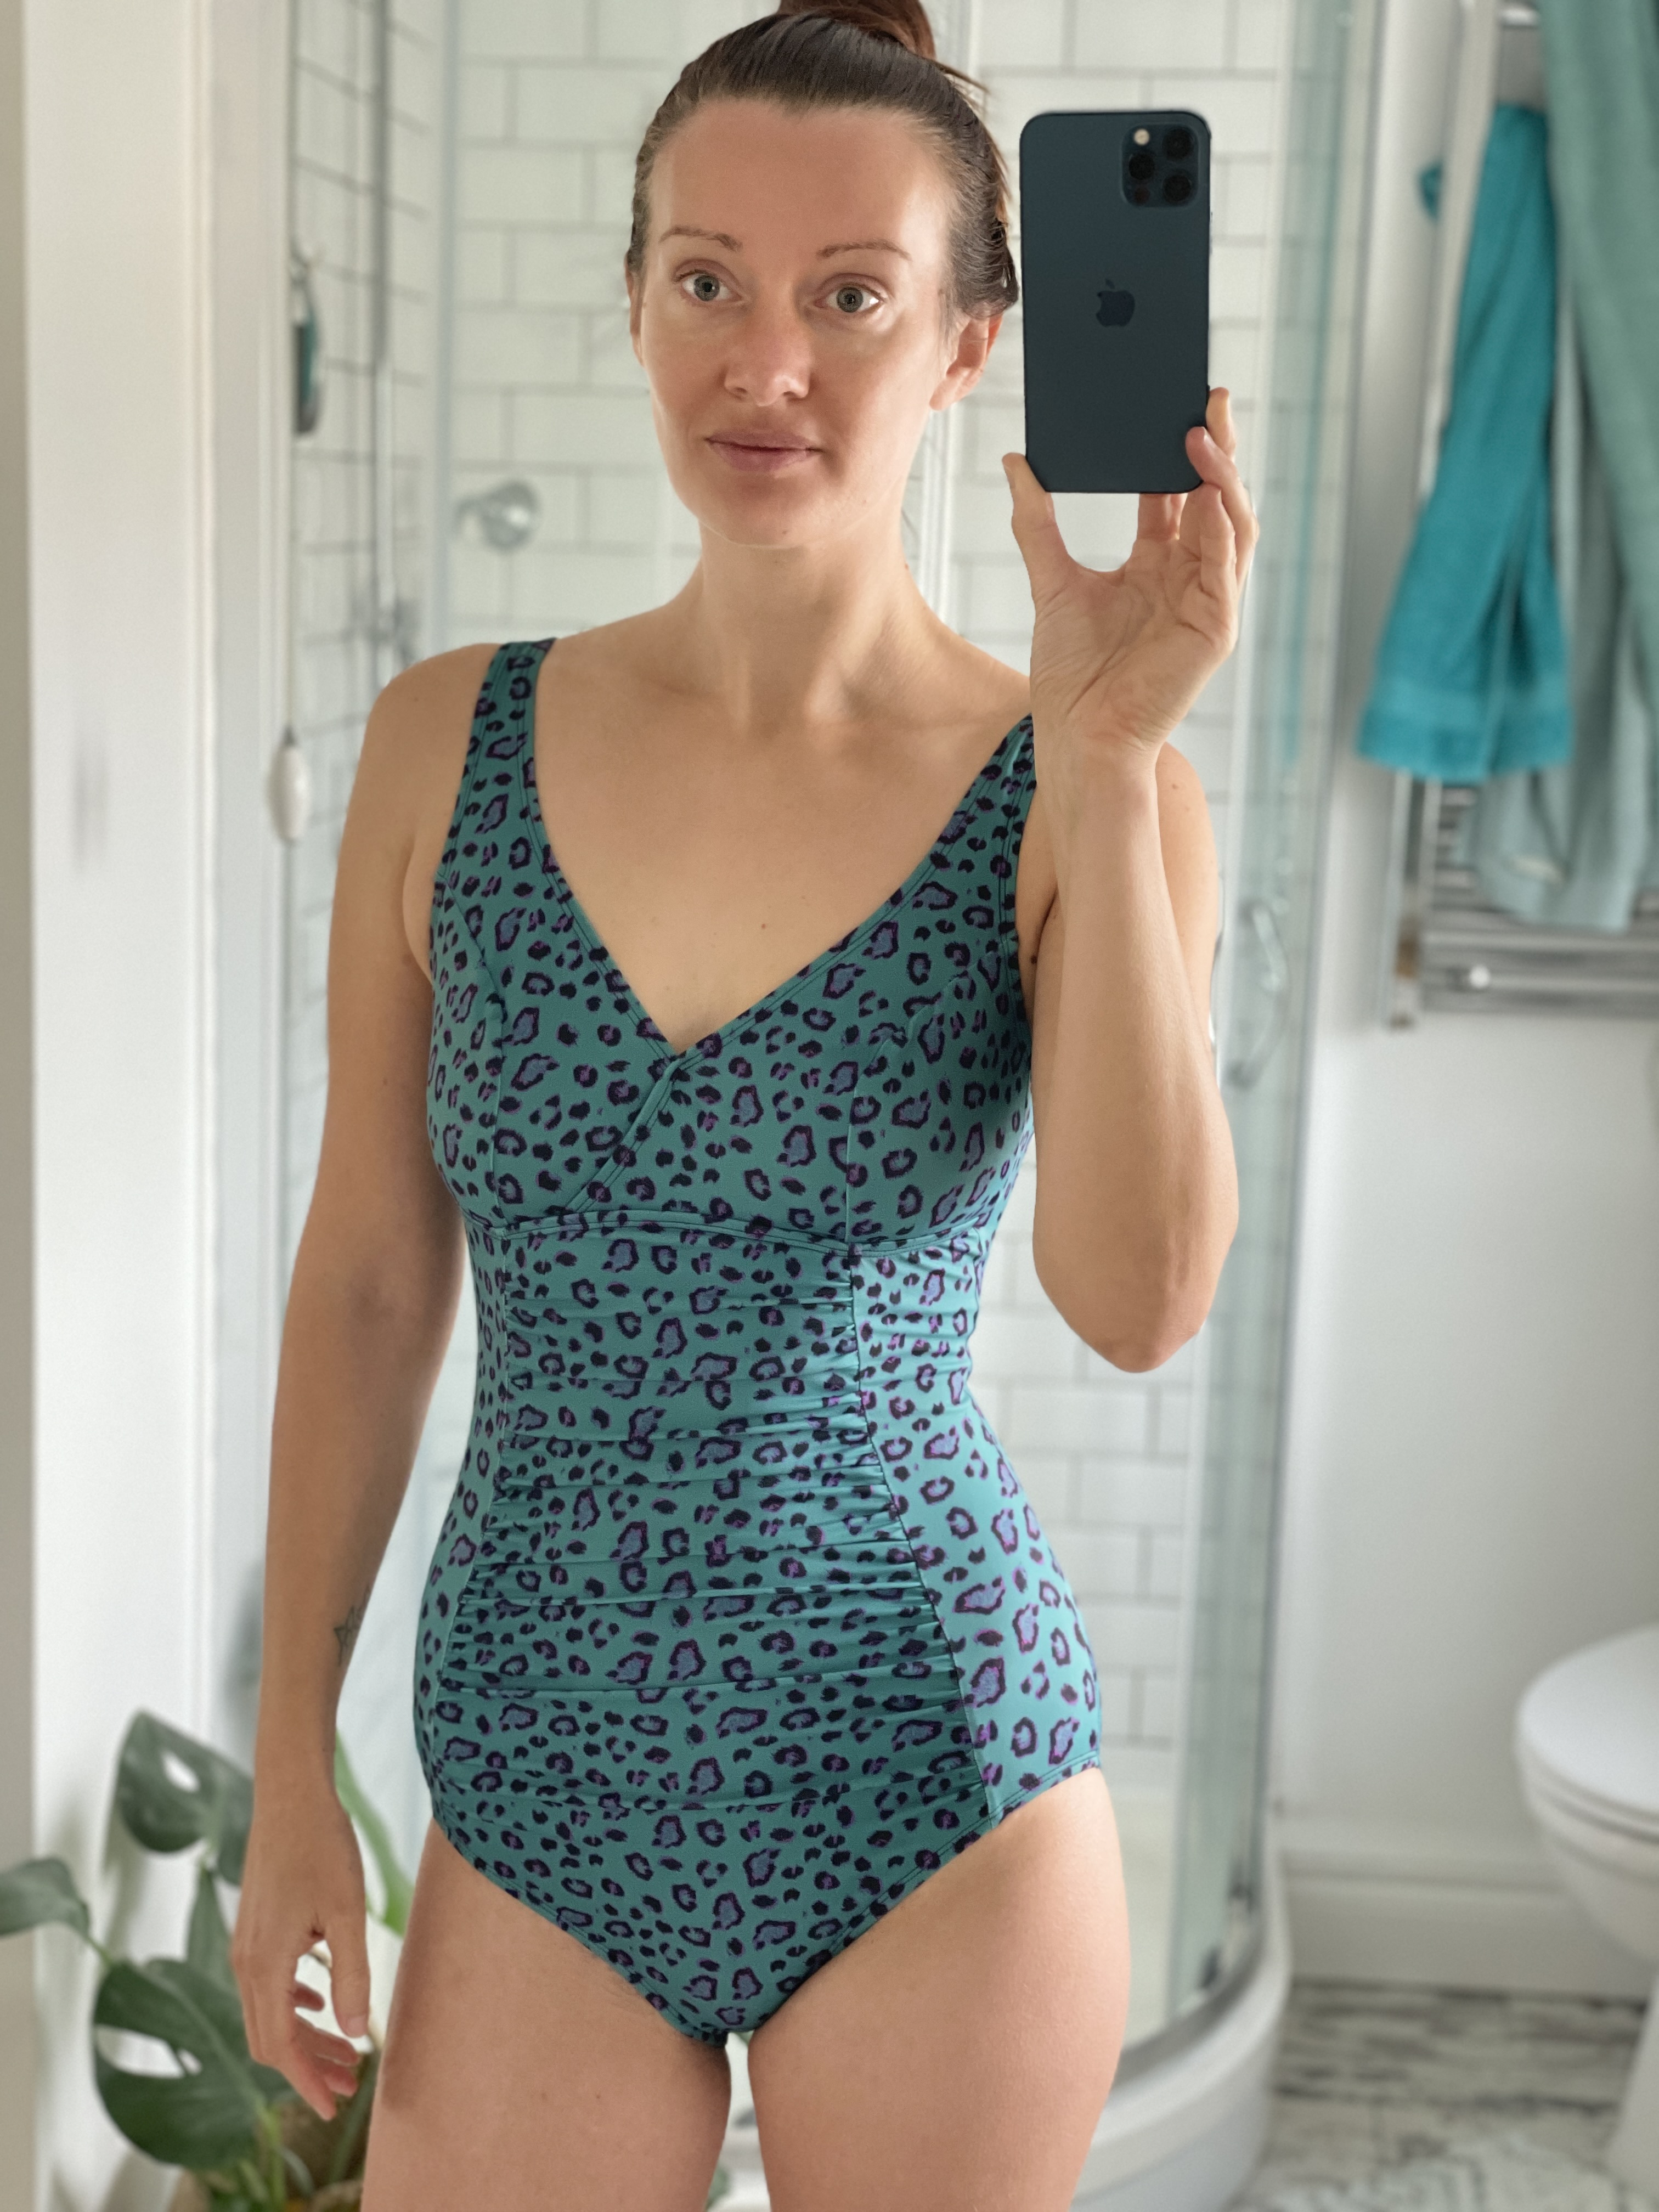 Halocline long length swimsuits review
